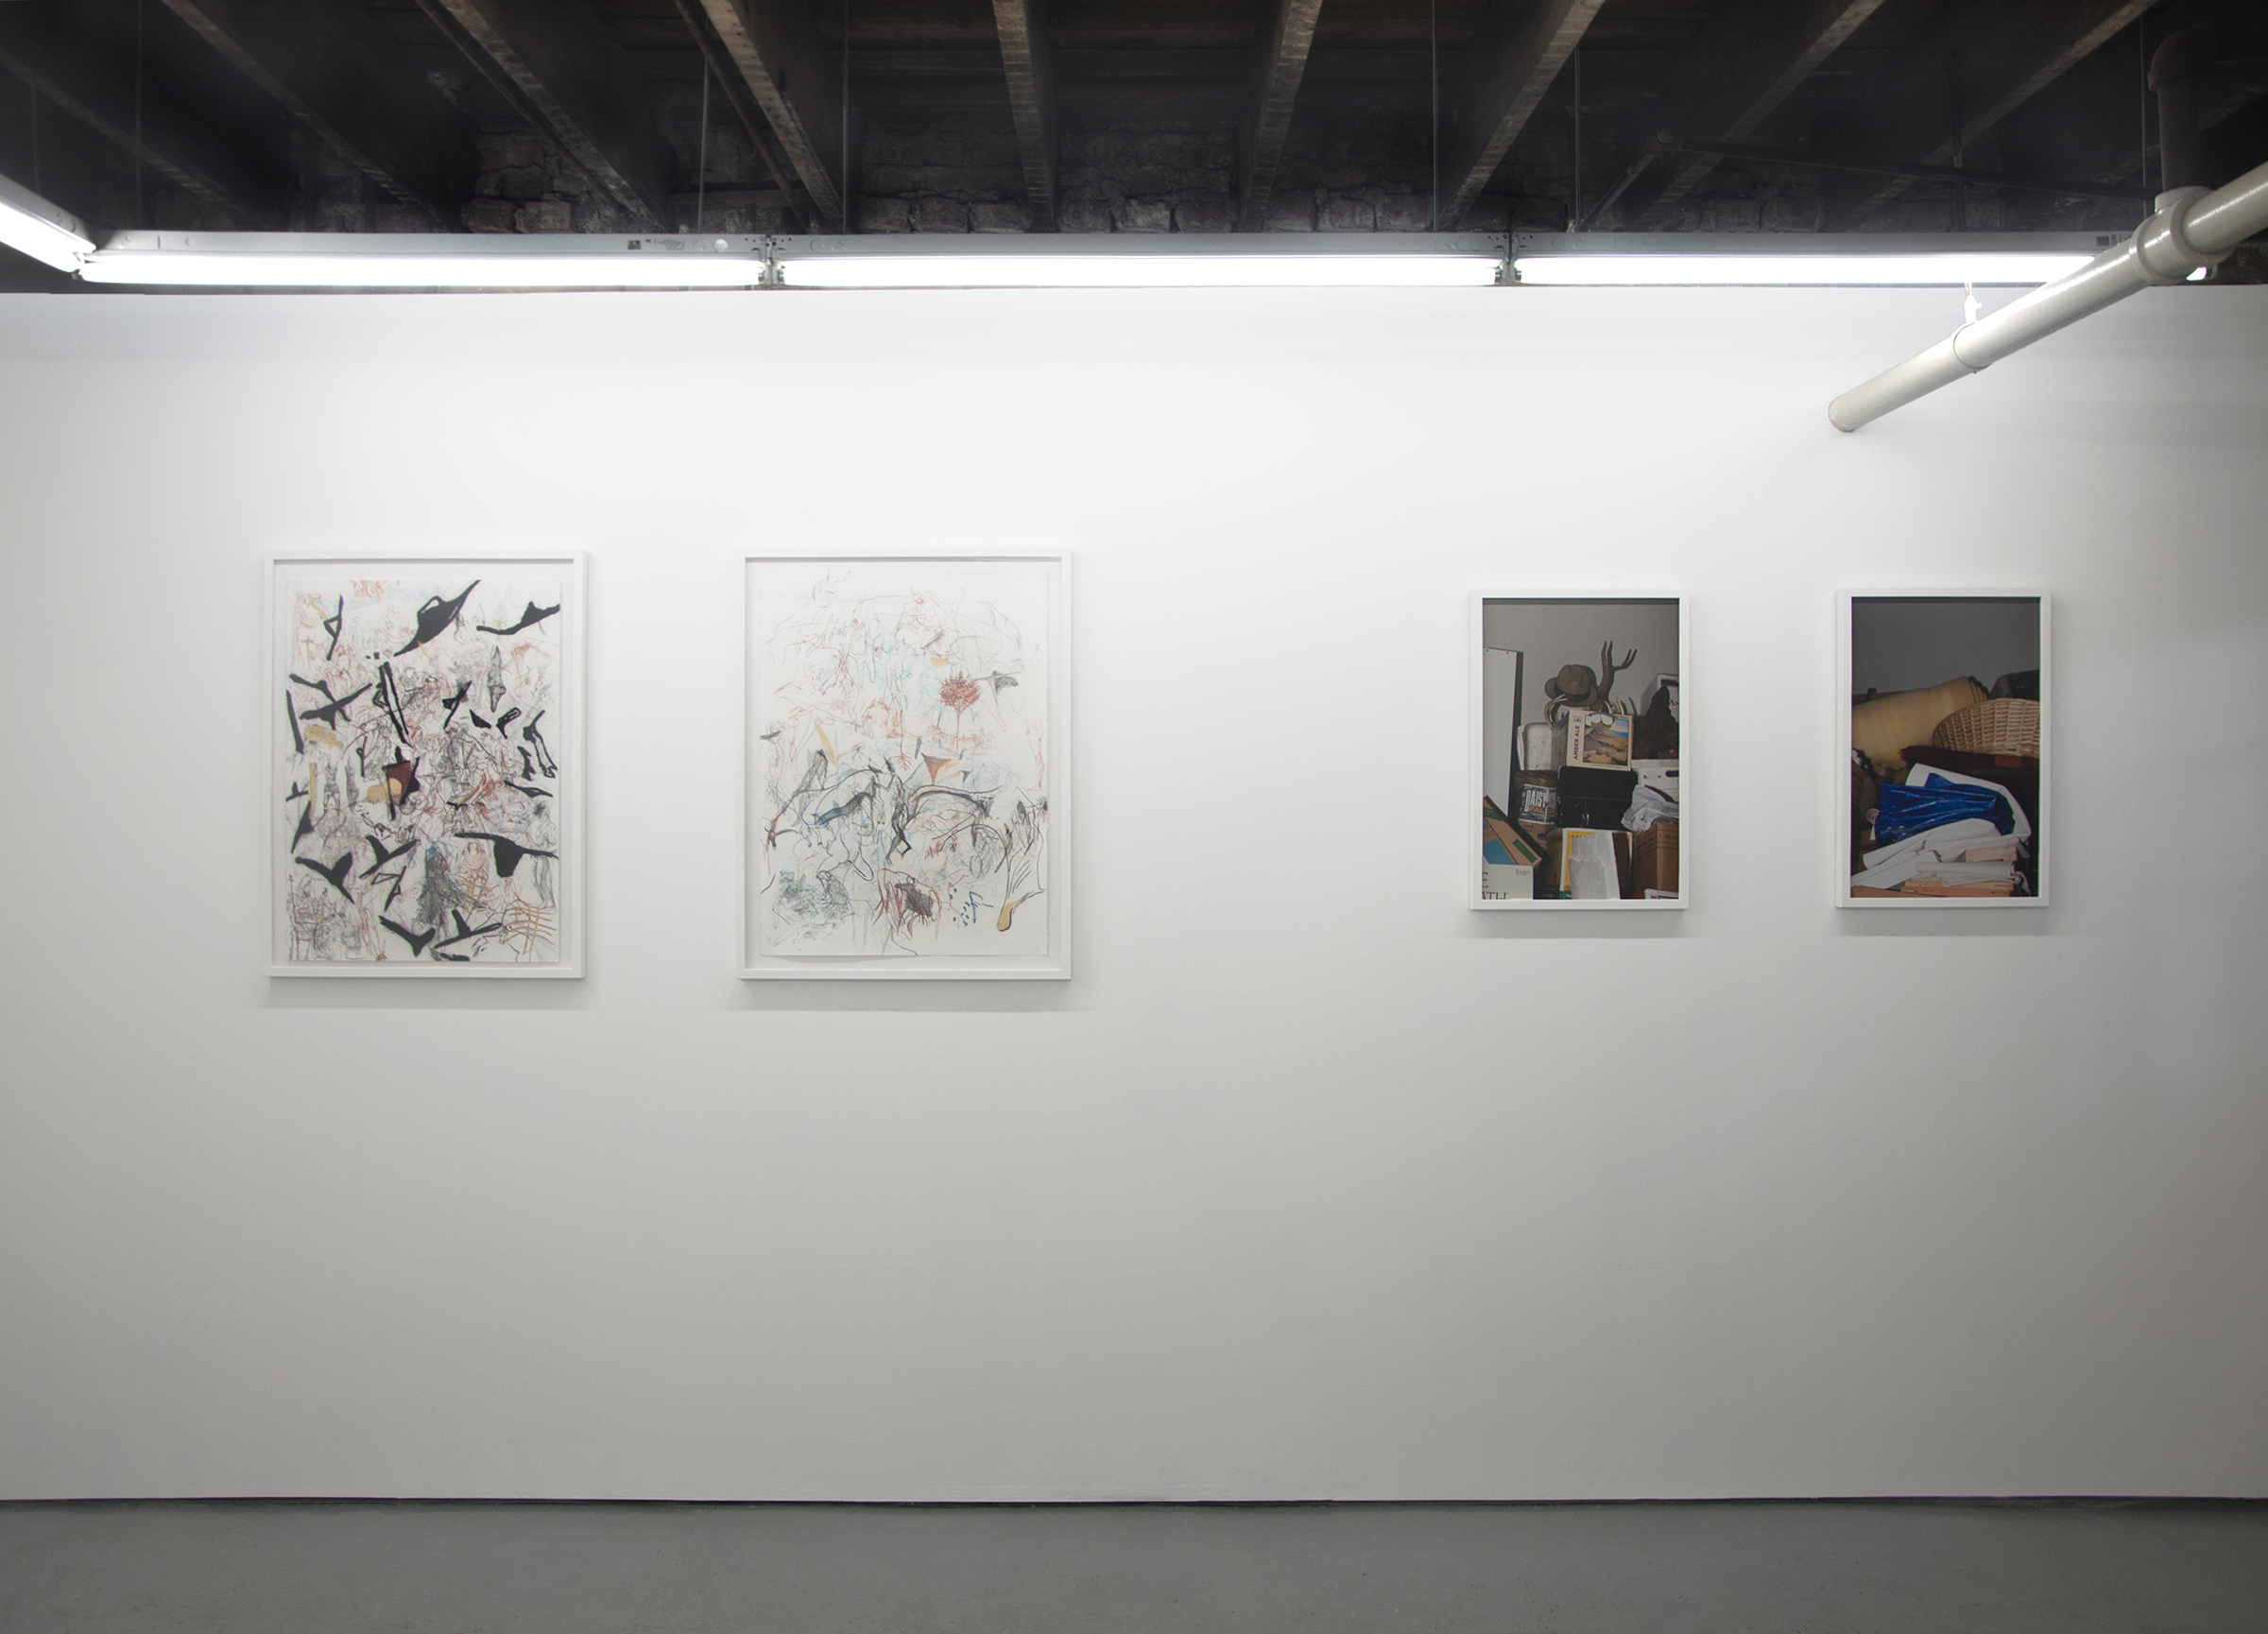 Frontward Tilt (from left to right), Rebecca Walz + Ryan M. Pfeiffer, “The Labyrinth”, 2015, Graphite, Chalk Lead, Colored Pencil, Charcoal, Iron Oxide & Gold Leaf; Rebecca Walz + Ryan M. Pfeiffer, “The Adjustment”, 2015, Graphite, Chalk Lead, Water Color, Colored Pencil, Charcoal & Gold Leaf; Ramsey Alderson, 2015, “Untitled”, Photograph; Ramsey Alderson, 2015, “Untitled”, Photograph.